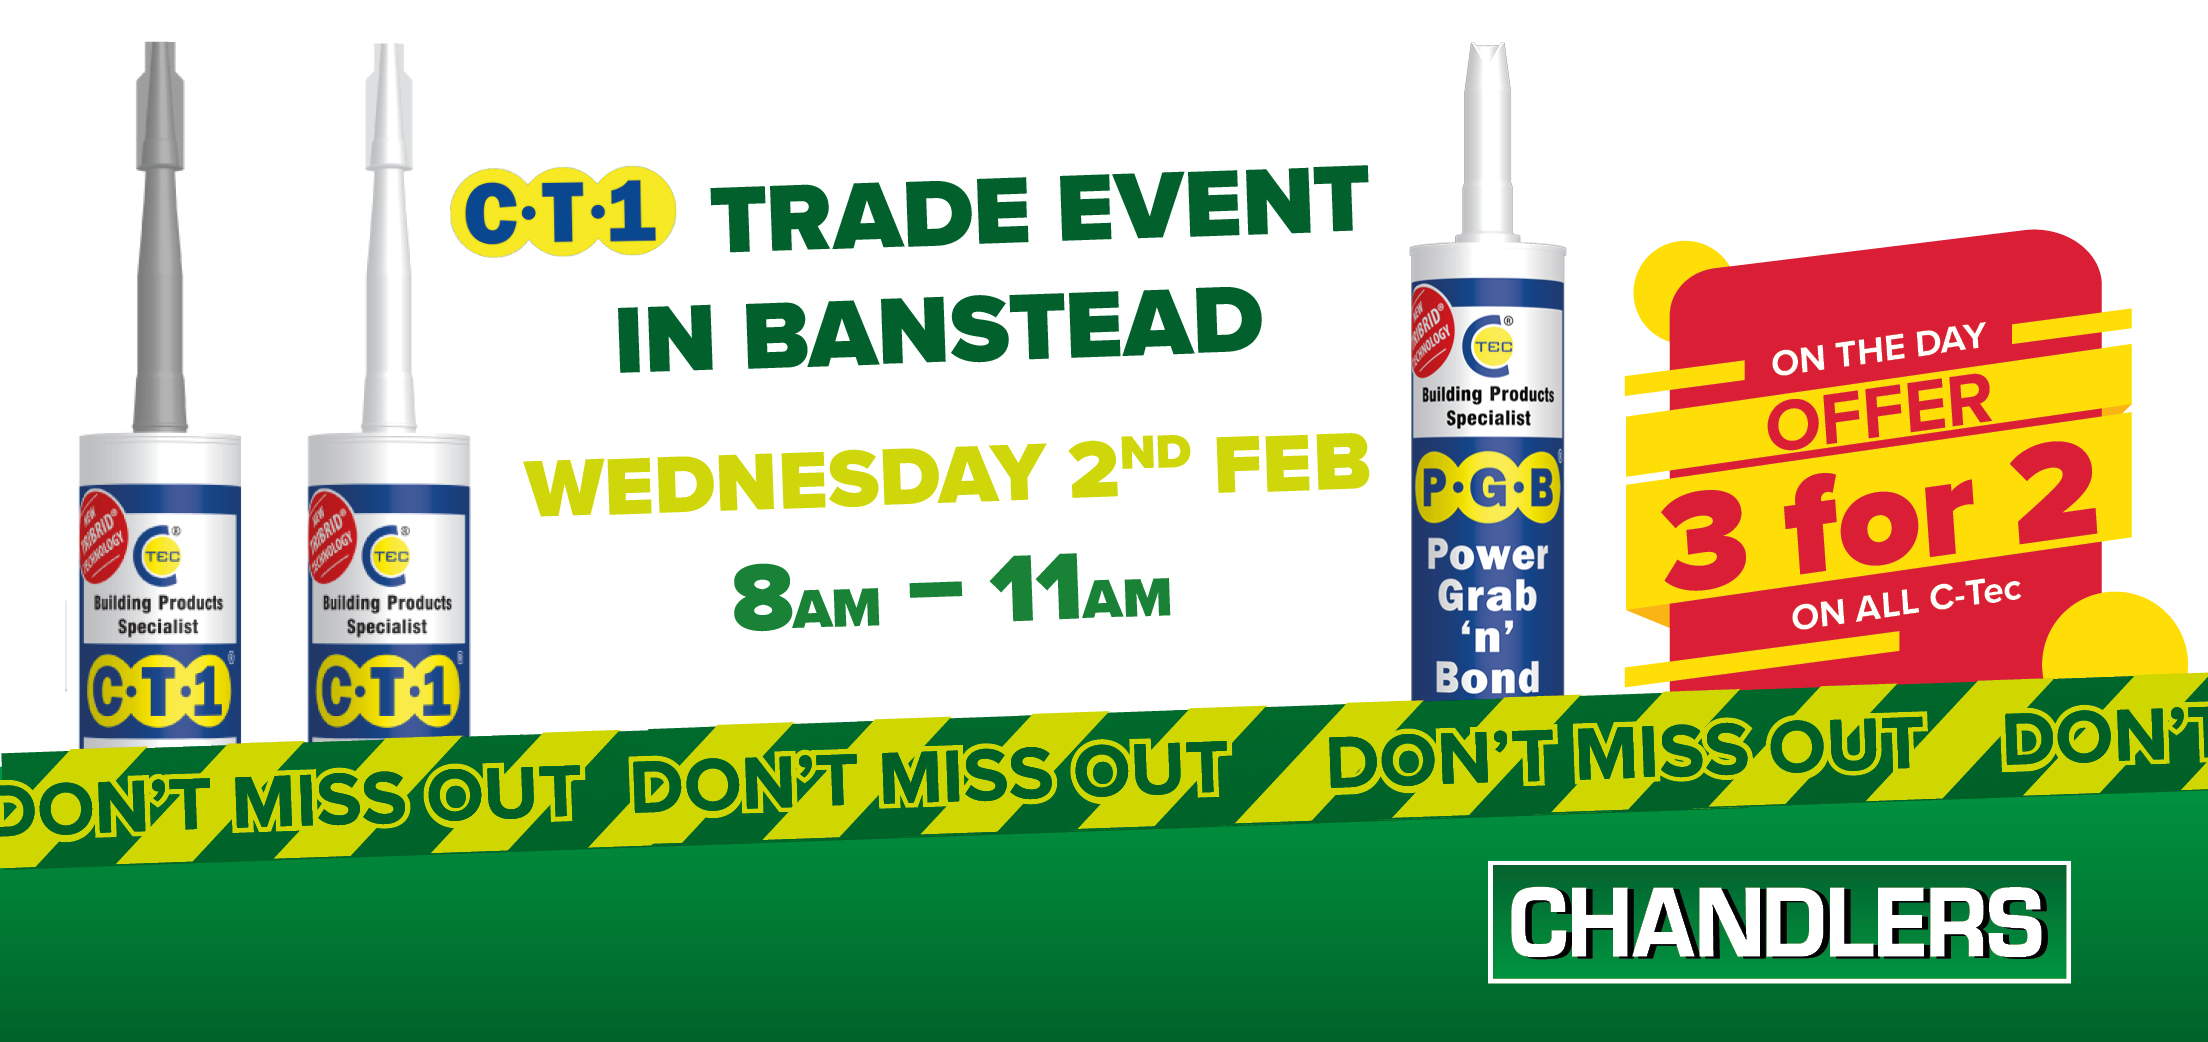 CT1 Event with Exclusive Offers to Take Place in Banstead